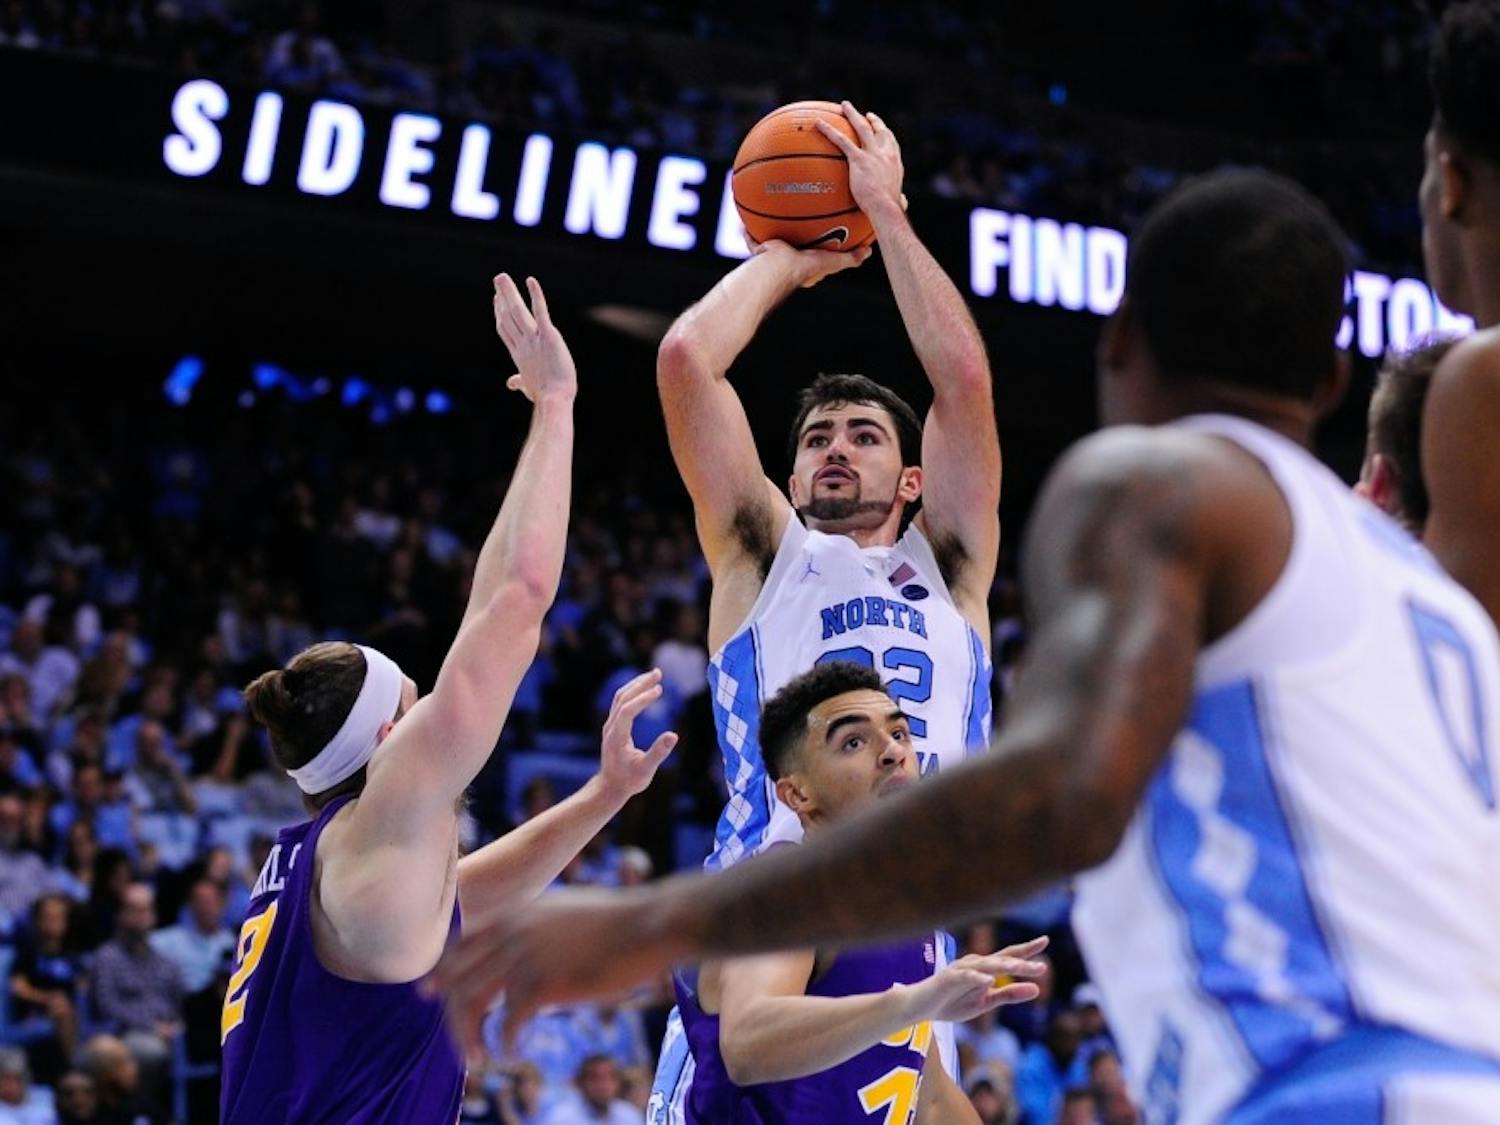 Forward Luke Maye (32) pulls up for a jump shot against Northern Iowa on Friday in the Smith Center.